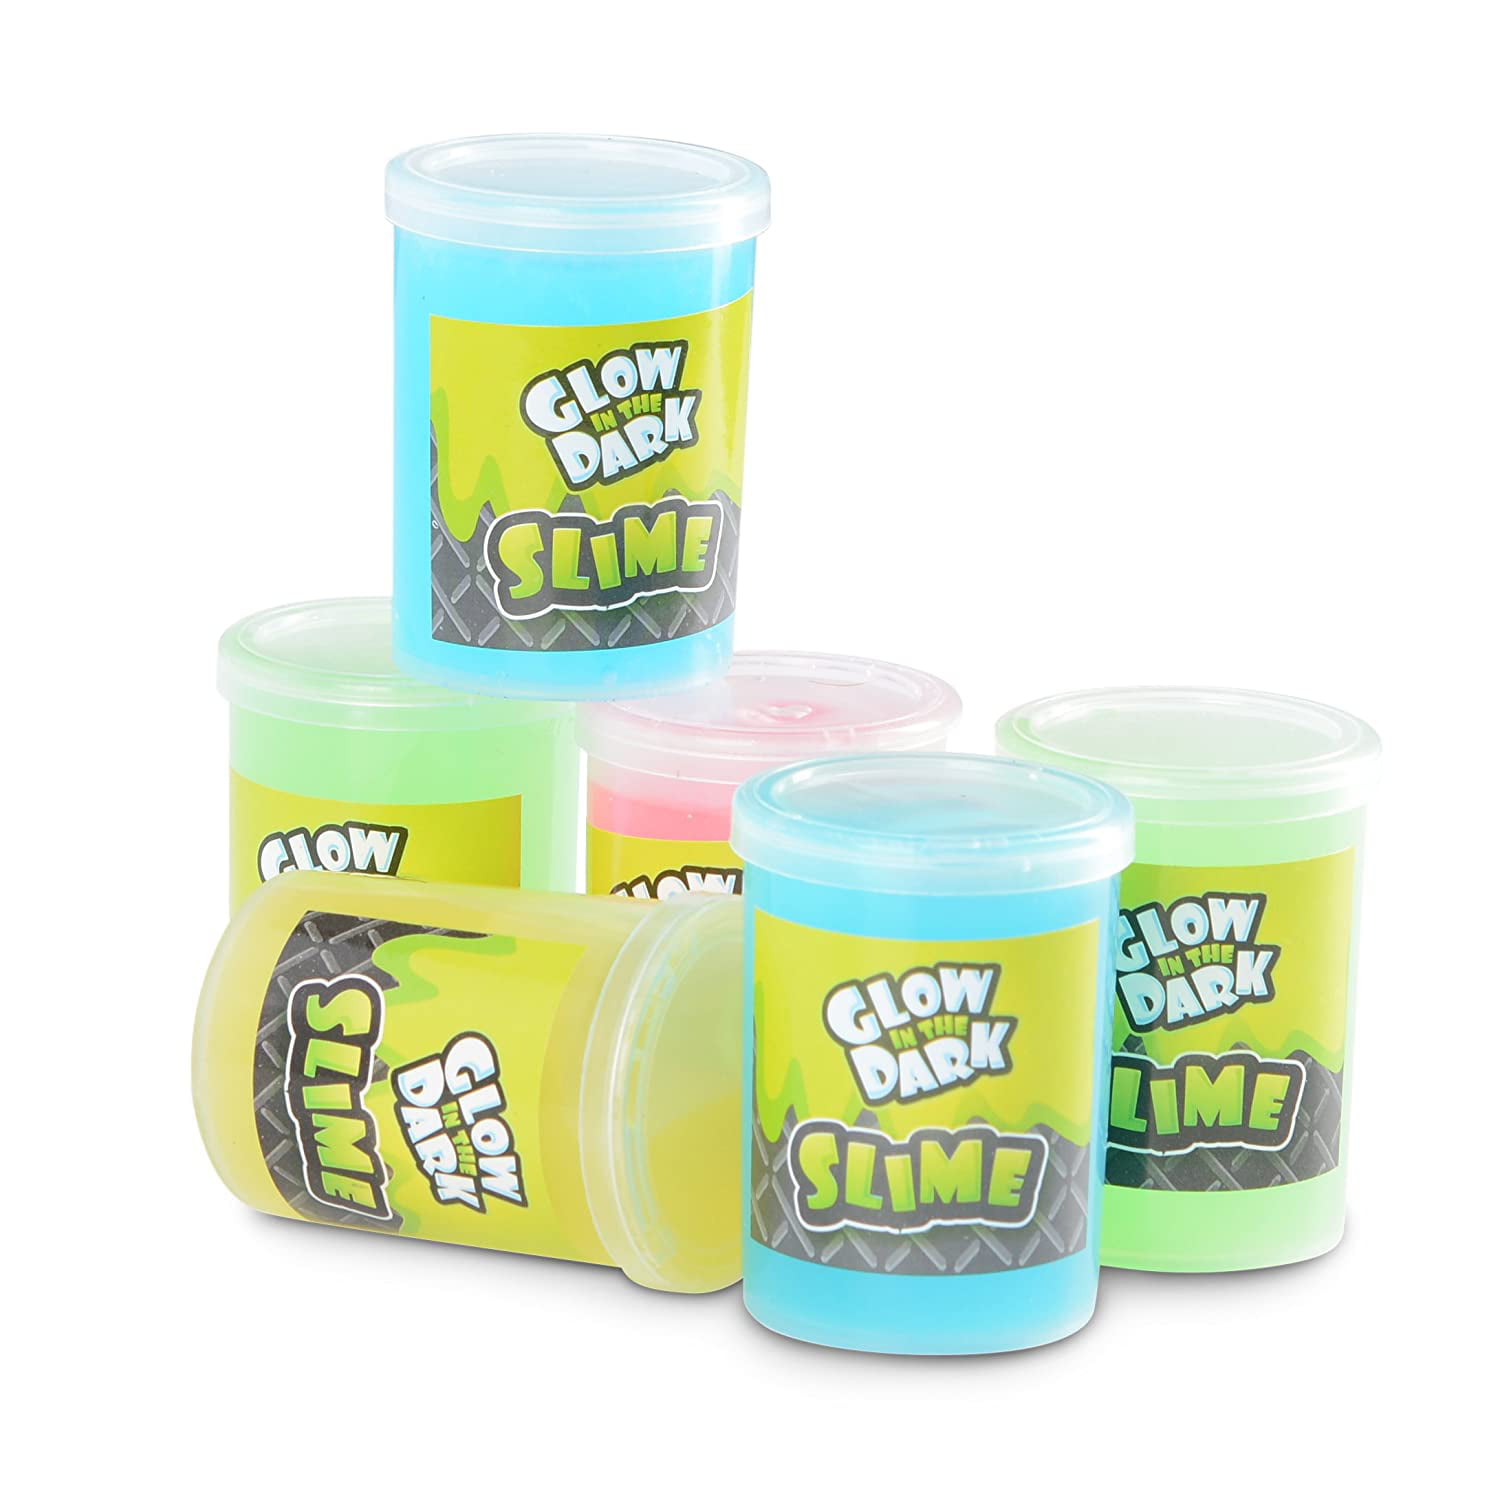 Glow Party Supplies Glow in The Dark Slime Party Pack Pack of 12 